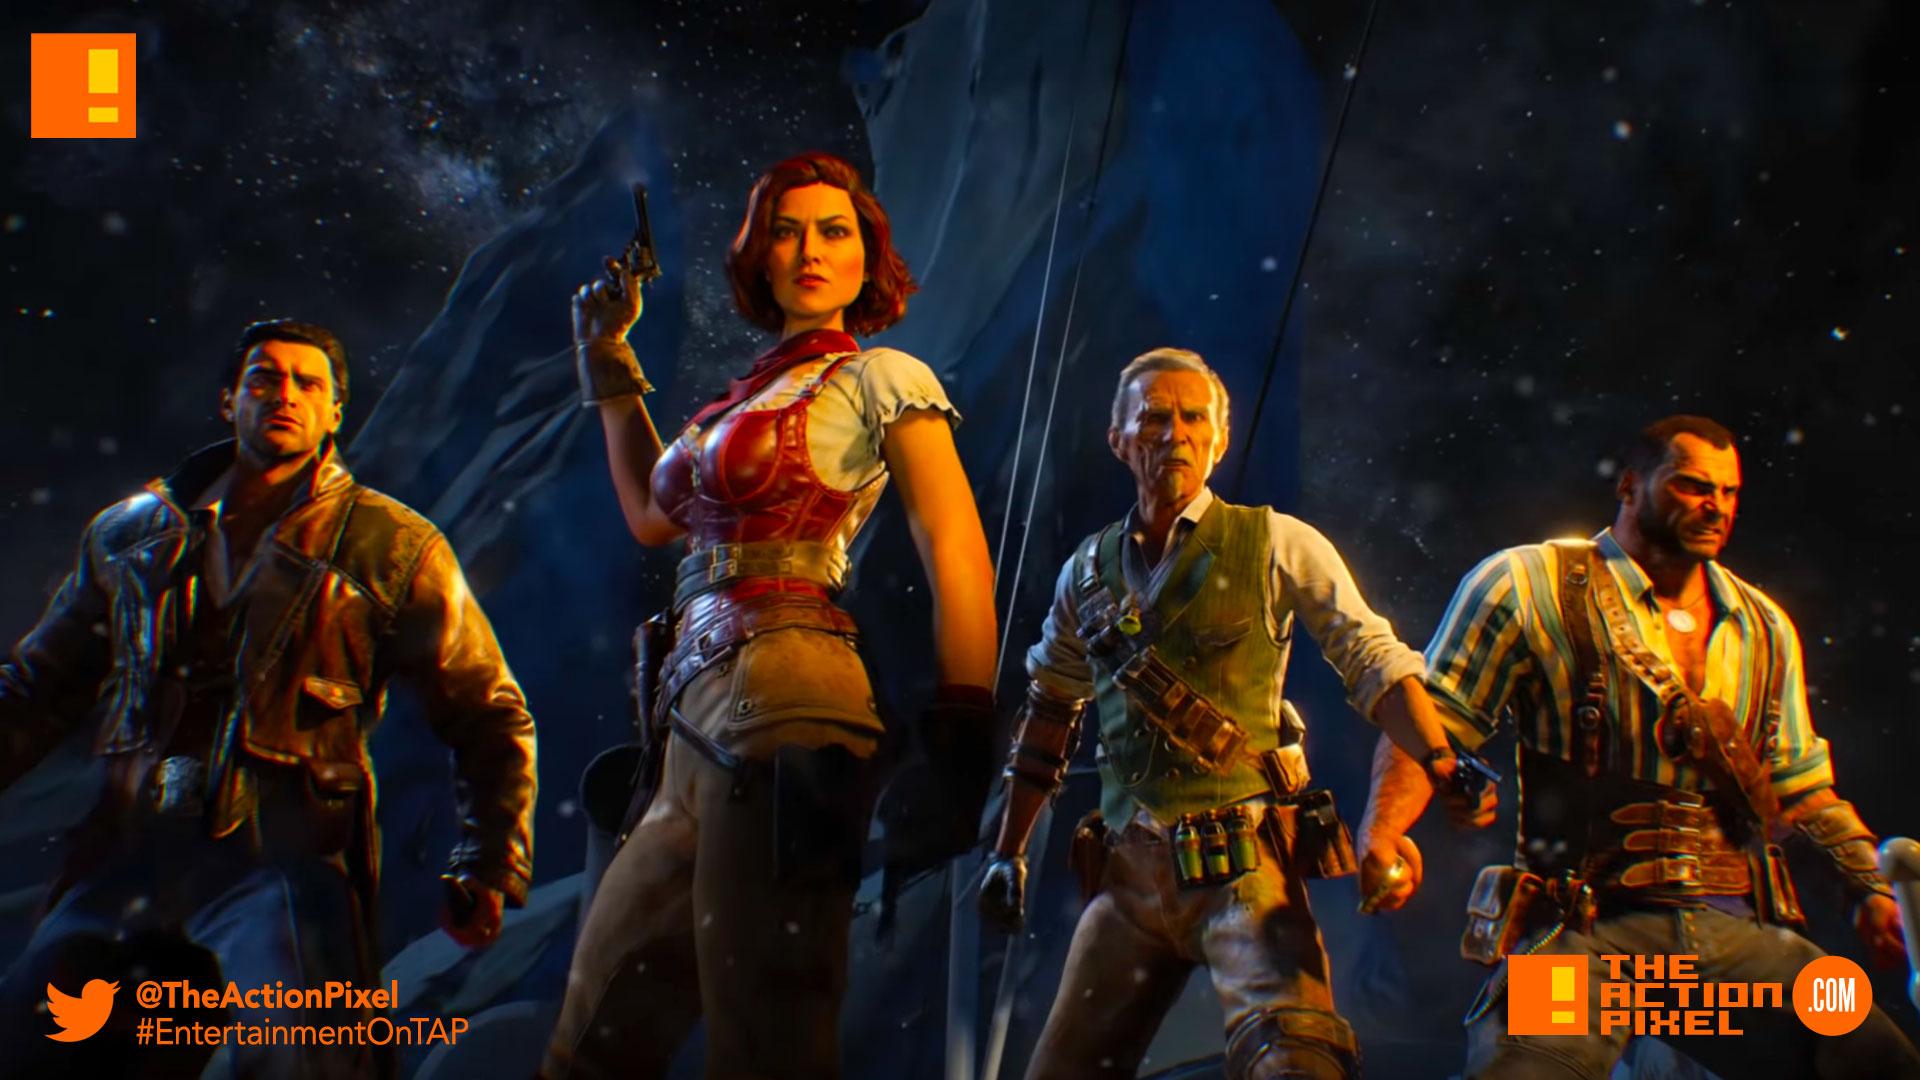 Call of Duty: Black Ops 4” Zombies gives us the real story behind